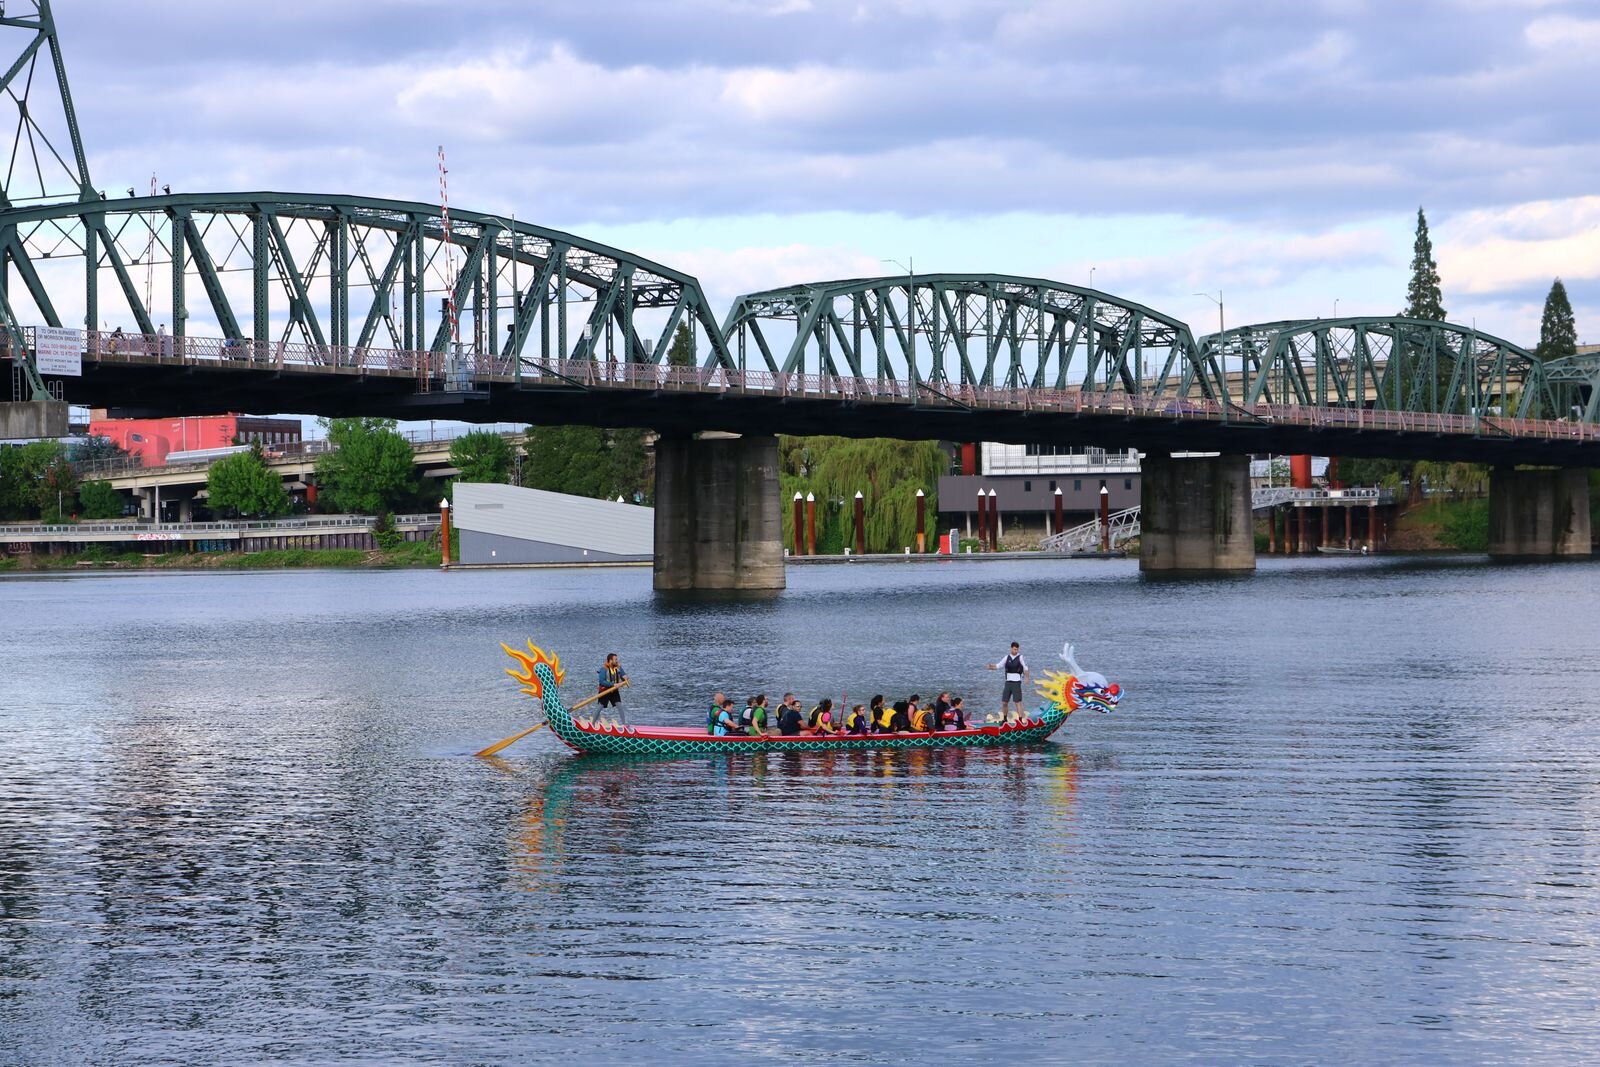 A colorful Dragonboat in the water with a bridge in the background at the Portland waterfront